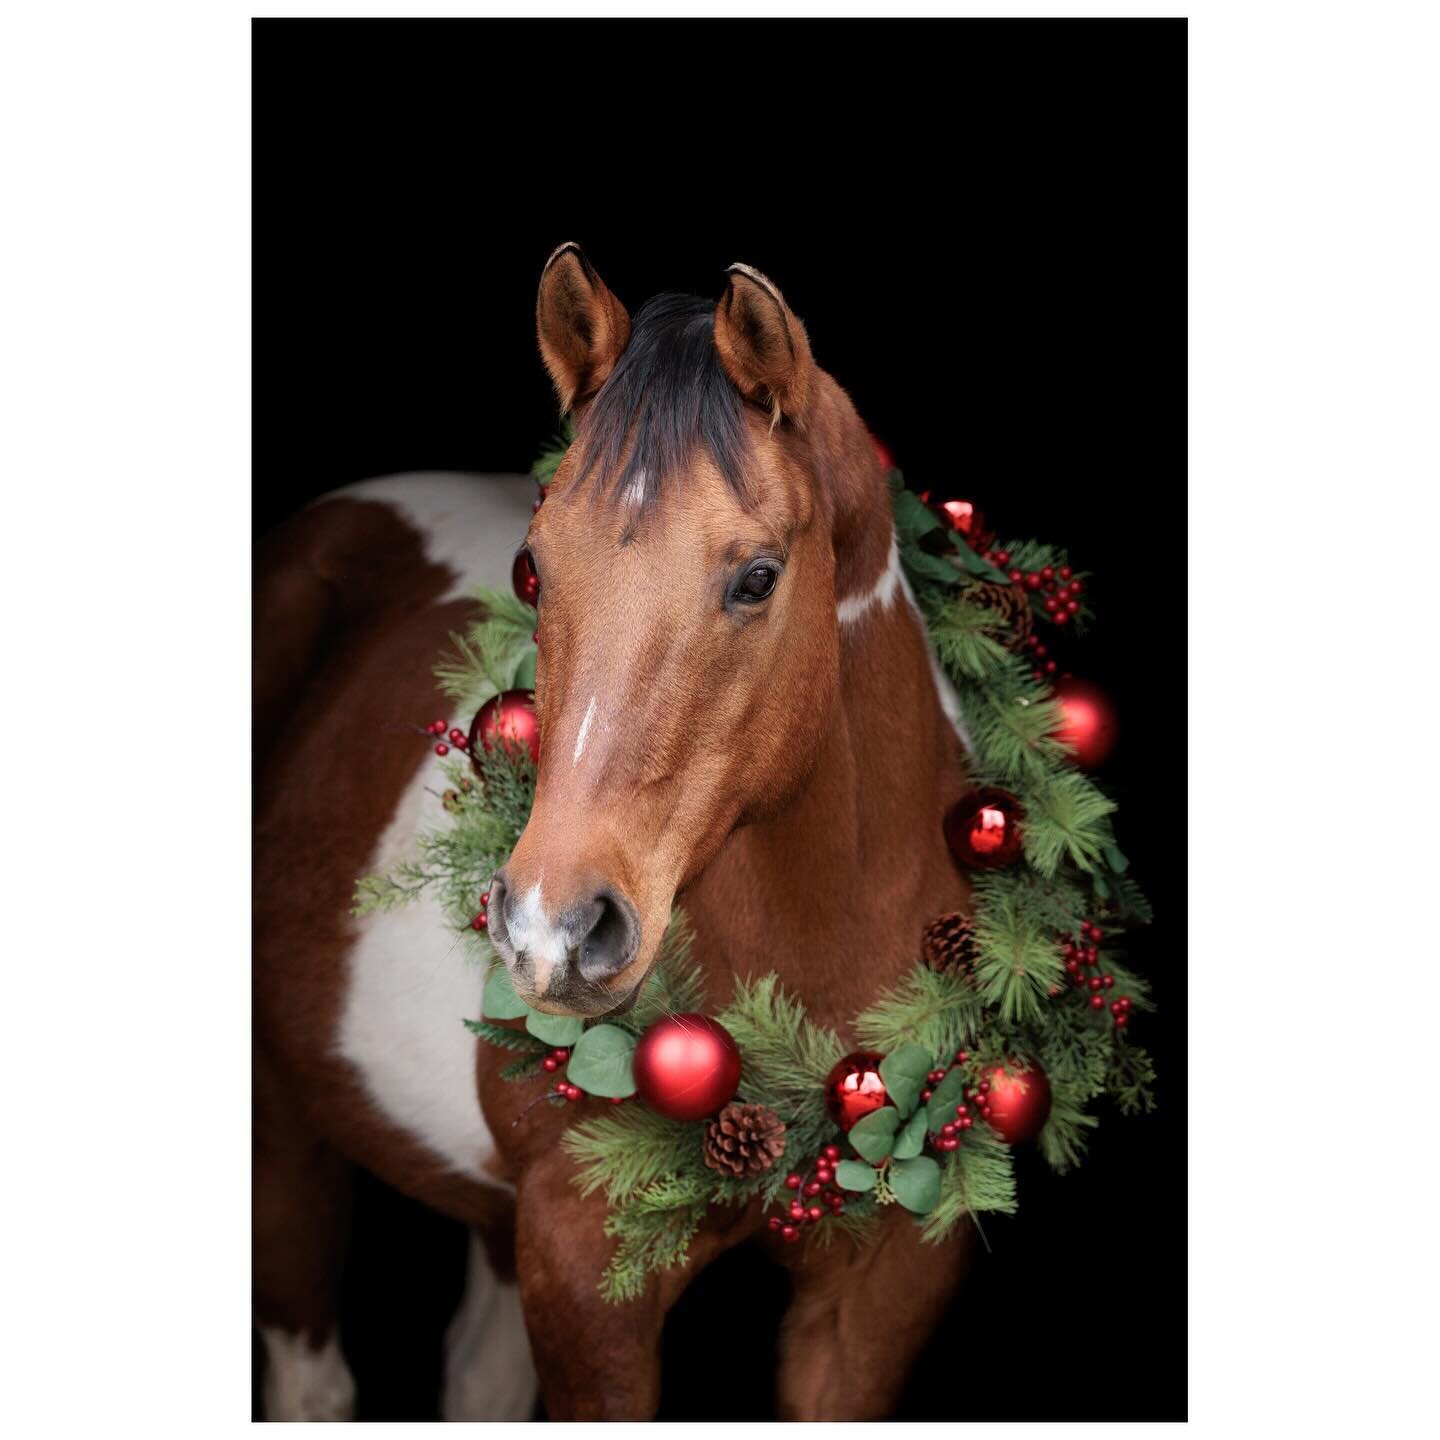 The ponies are looking festive!🎄

#merrychristmas #apha #aqhaproud #aqha #nhequinephotographer